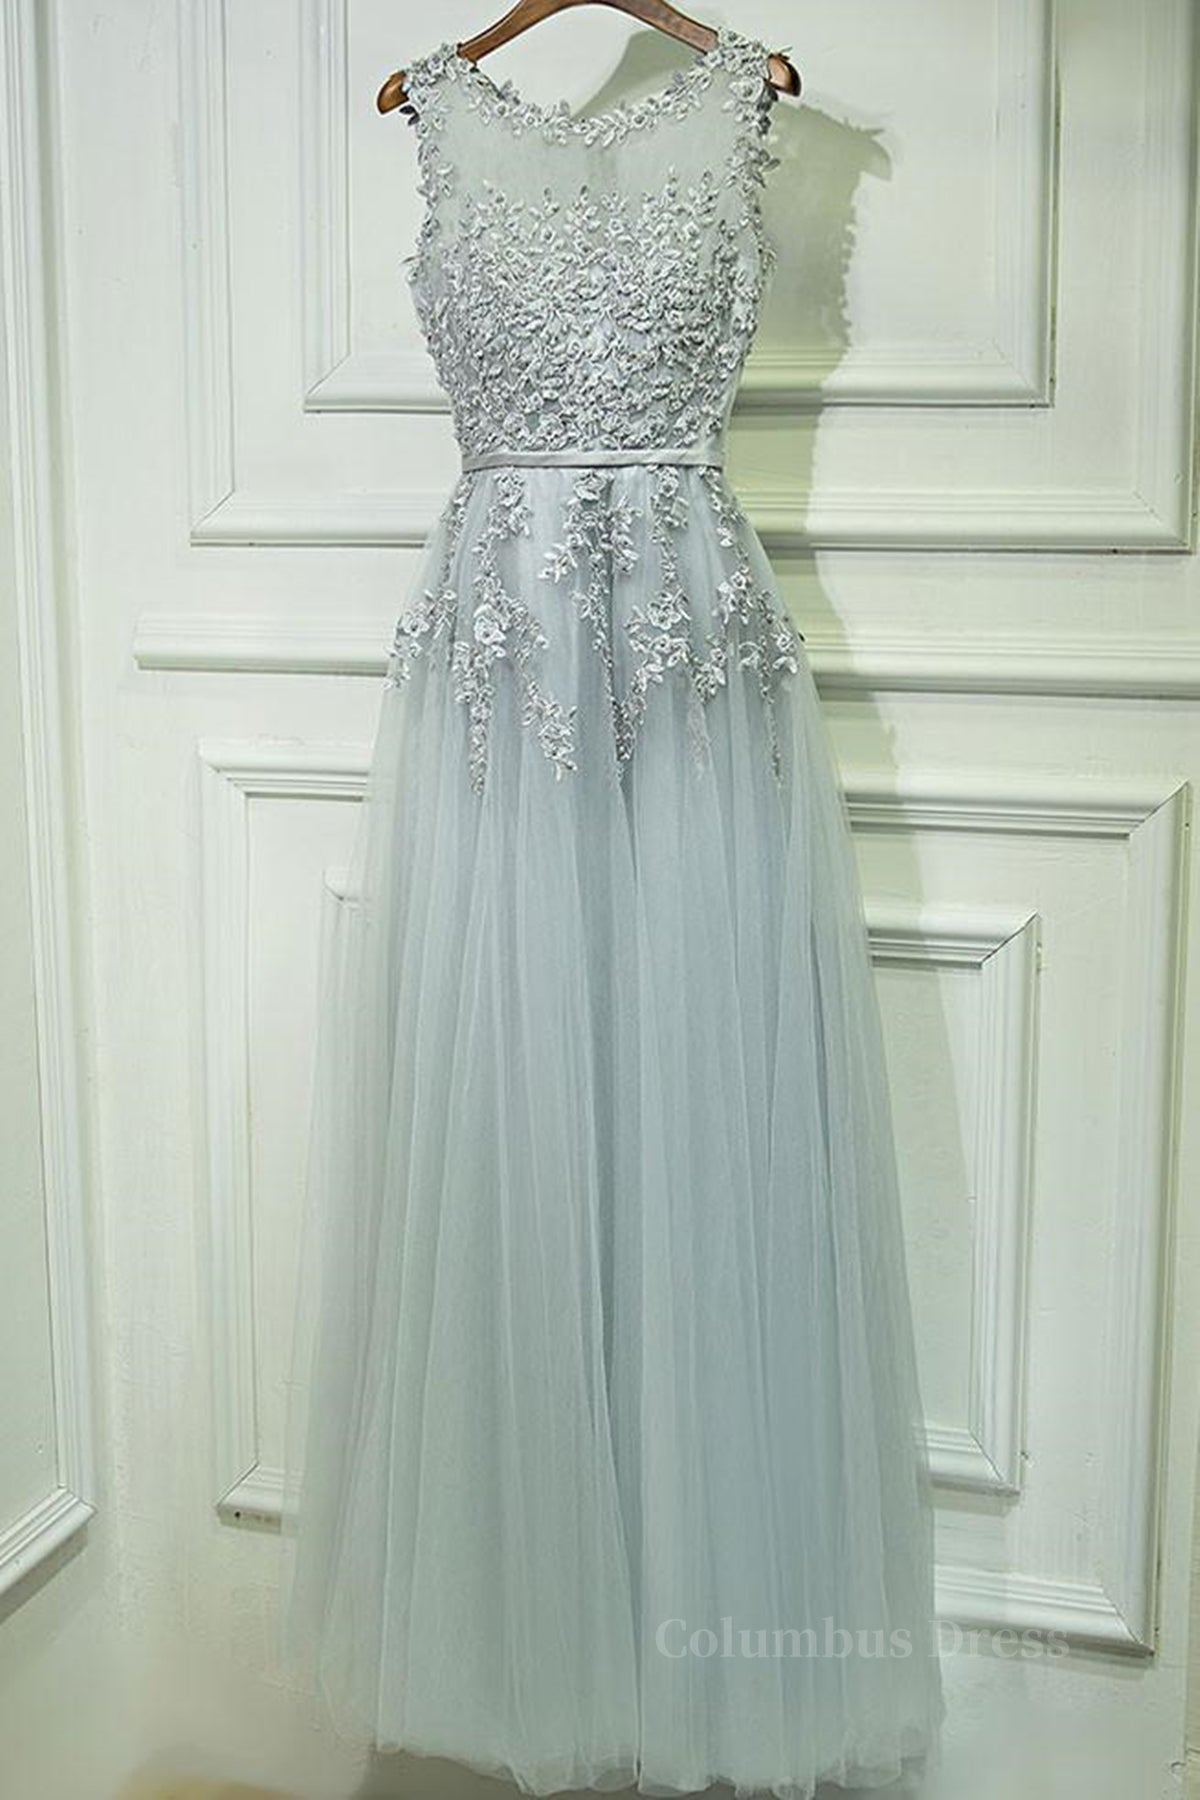 Party Dress For Couple, Round Neck Lace Prom Dresses, Lace Formal Evening Dresses